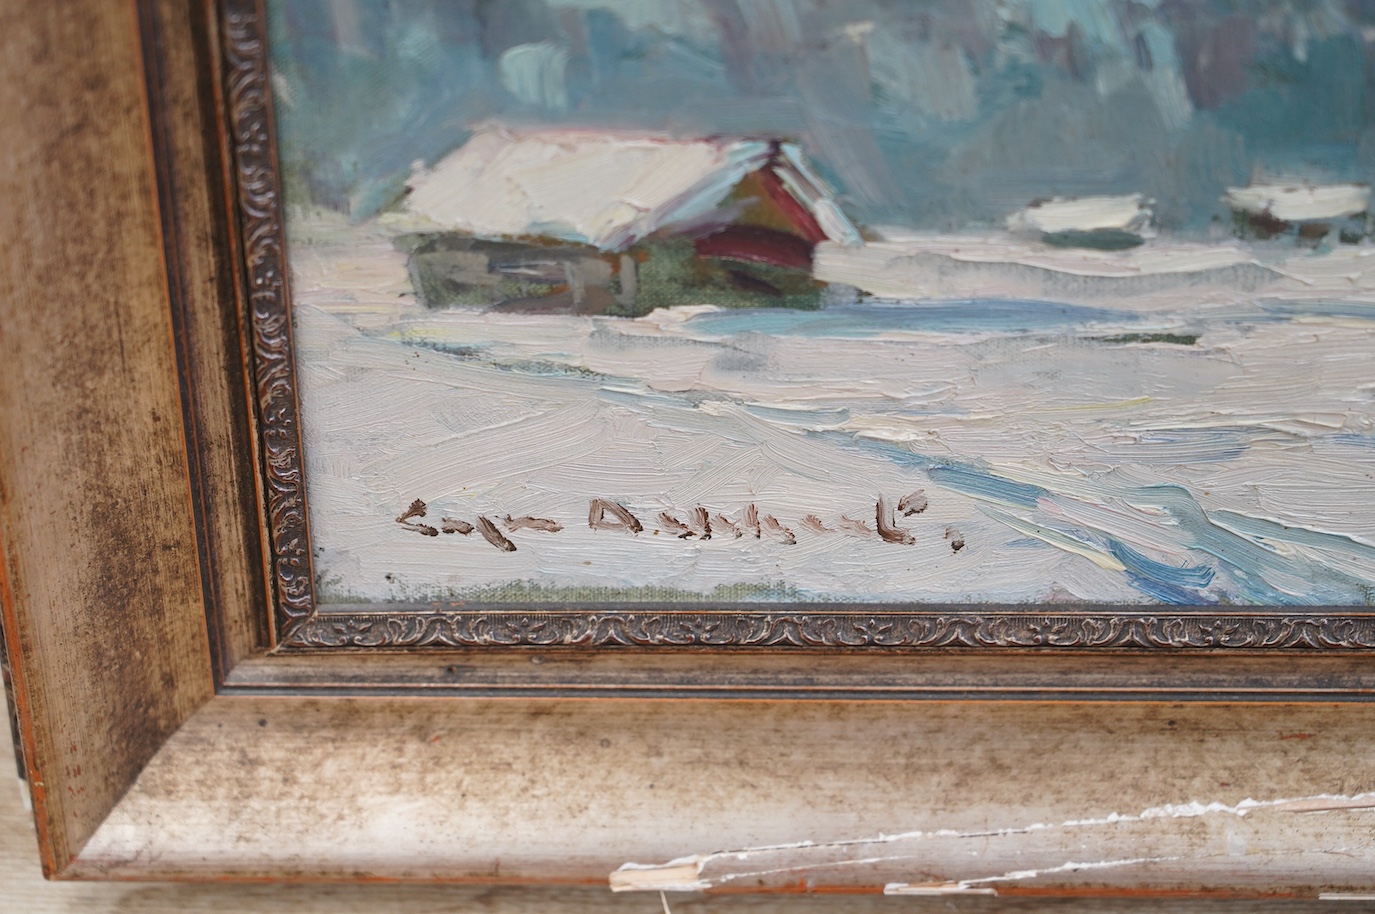 Impressionist oil on canvas, Alps scene with chalets, indistinctly signed lower left, 47 x 54cm. Condition - canvas good, frame damaged